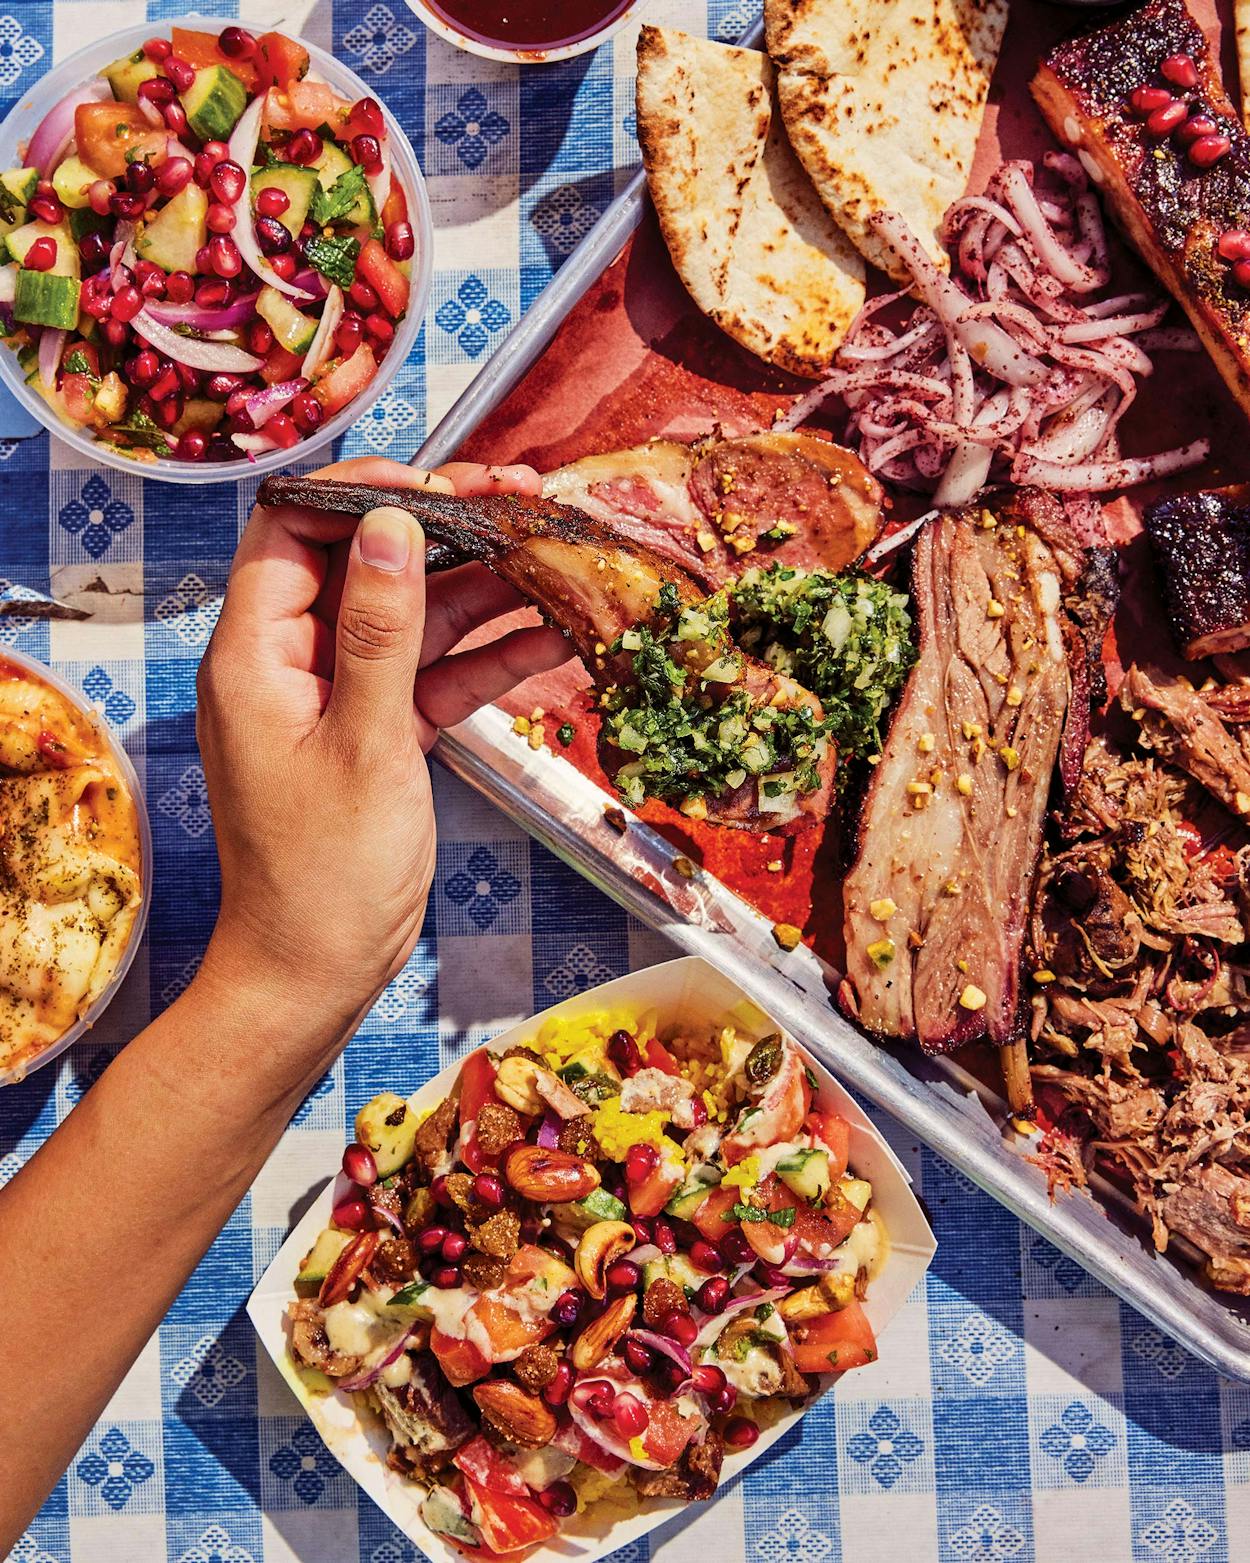 https://img.texasmonthly.com/2023/08/BBQ-Barbecue-Best-New-Restaurants-texas-monthly-KG-BBQ-Austin-tray.jpg?auto=compress&crop=faces&fit=fit&fm=jpg&h=0&ixlib=php-3.3.1&q=45&w=1250